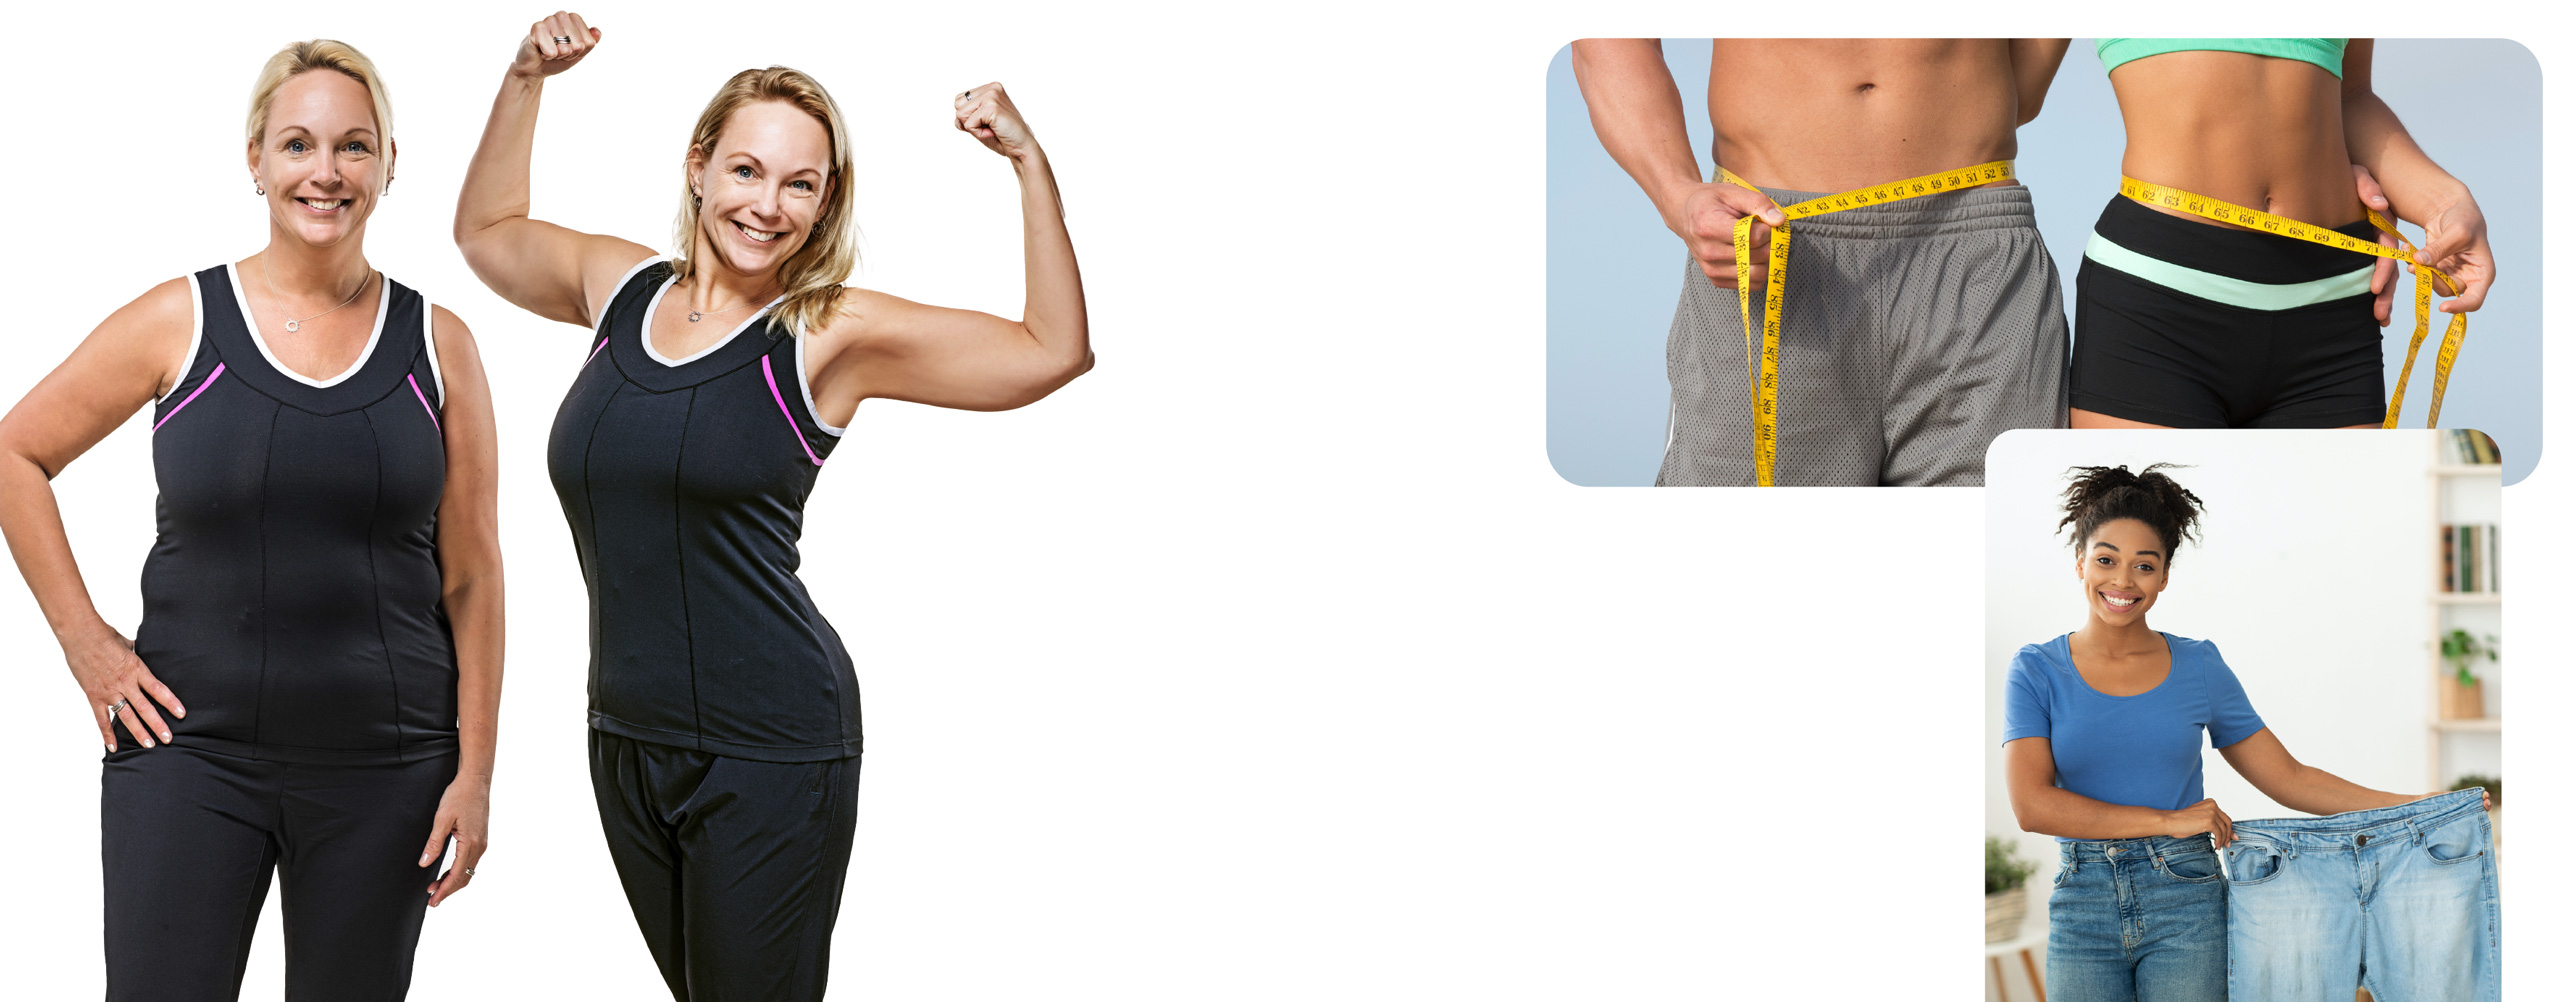 Weight-Loss-Surgery-Institute-Main-Banner